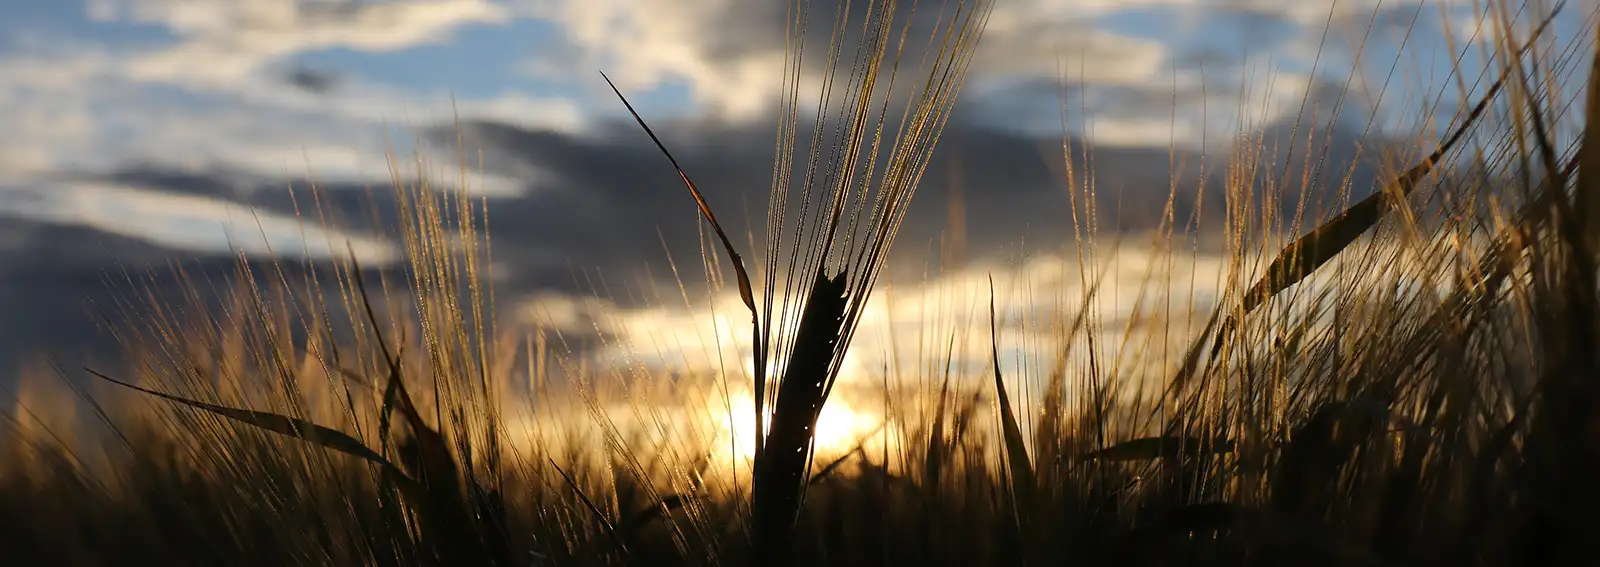 Close up of a wheat field with a sunset in the background.